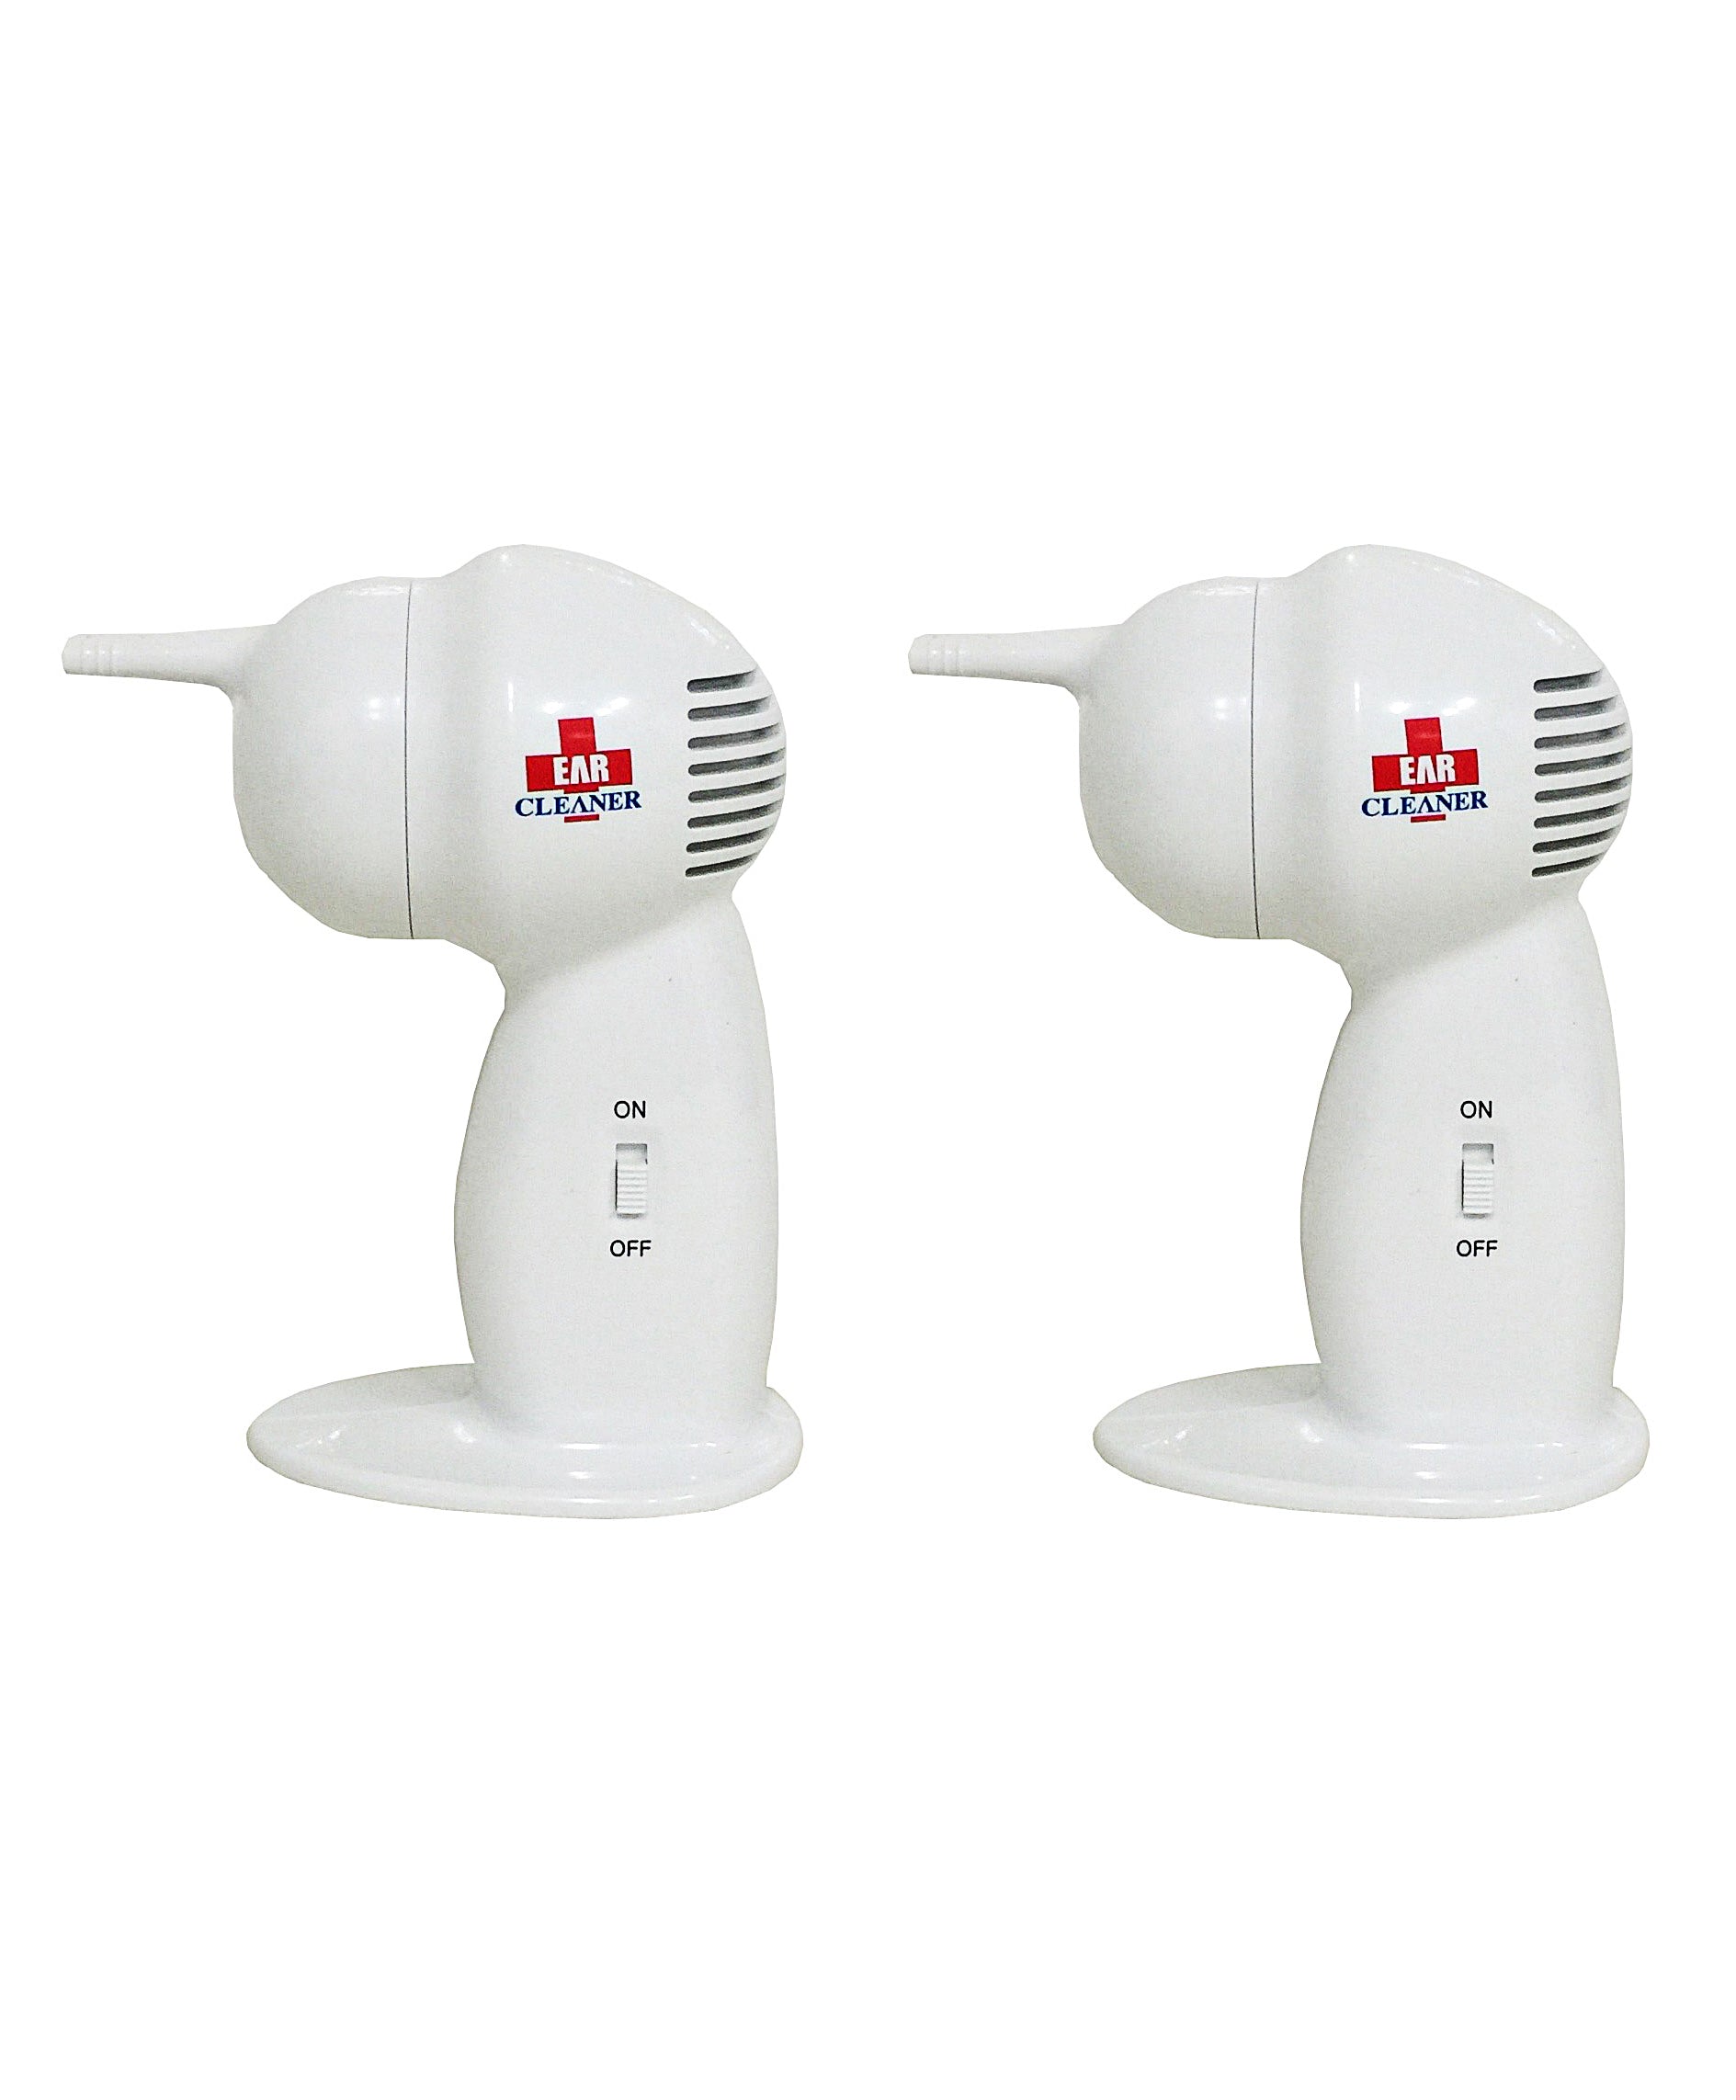 2 Pieces Ear Cleaners Wax Removers Cordless Vacuum Painless Suction Made in Korea Children Senior non-toxic silicone tube infections